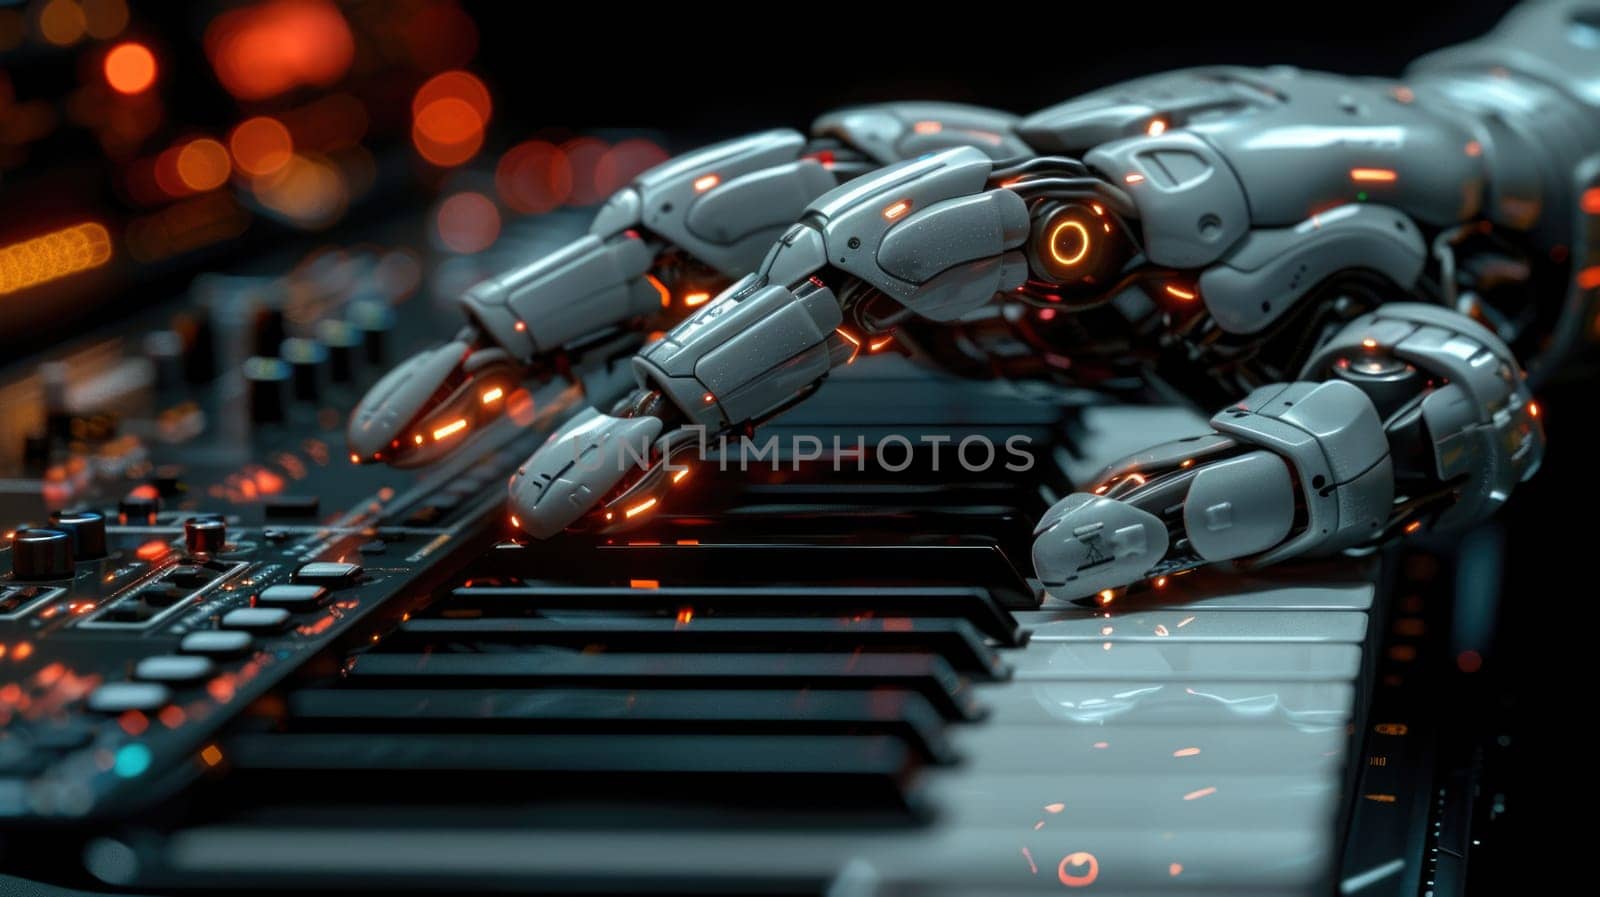 Advanced Robotic Hand Resting on Keyboard by but_photo